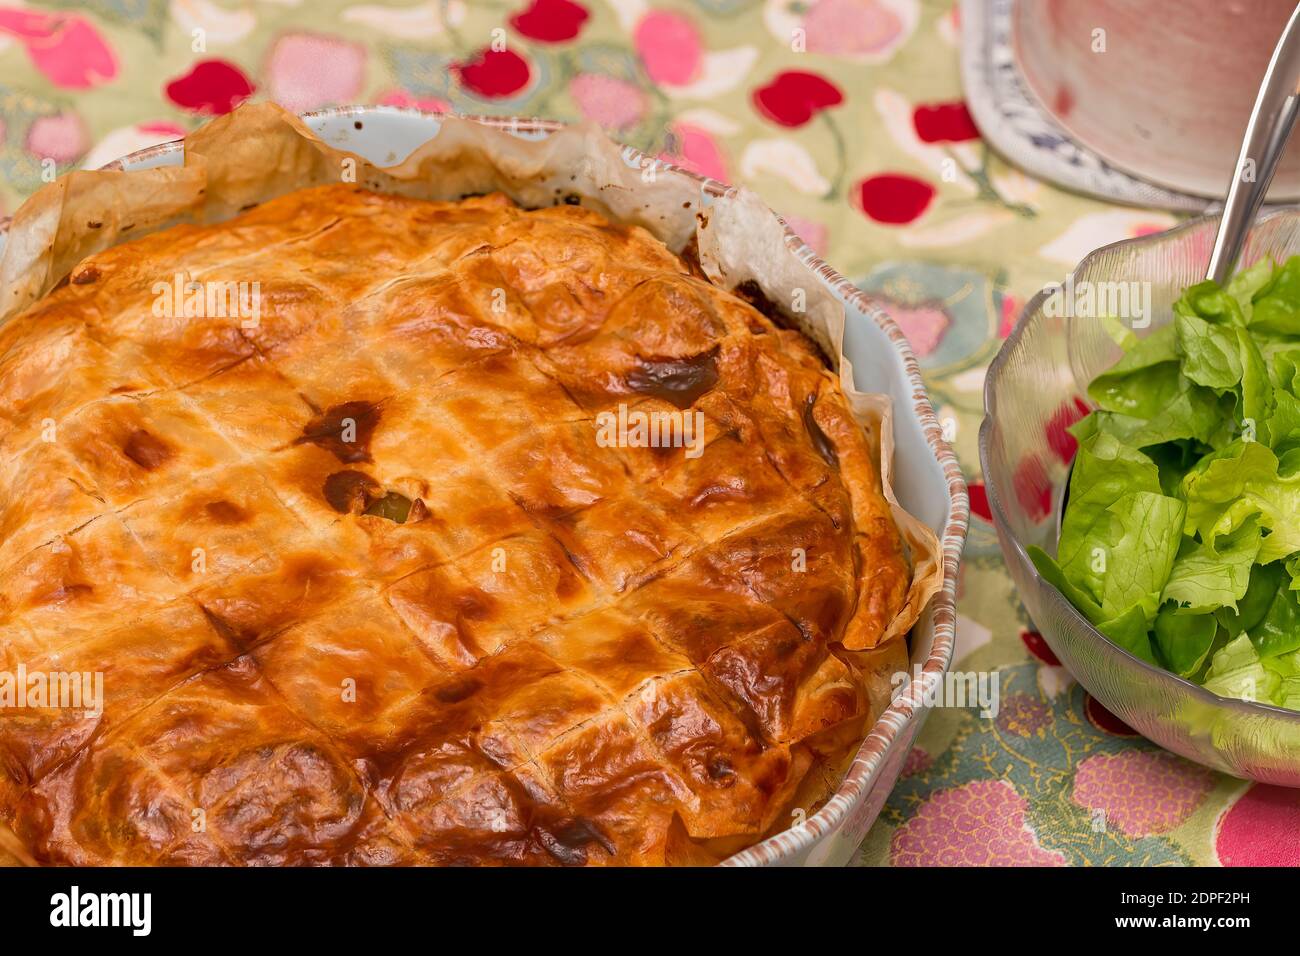 Baked potato pie and salad on a colorful tablecloth Stock Photo